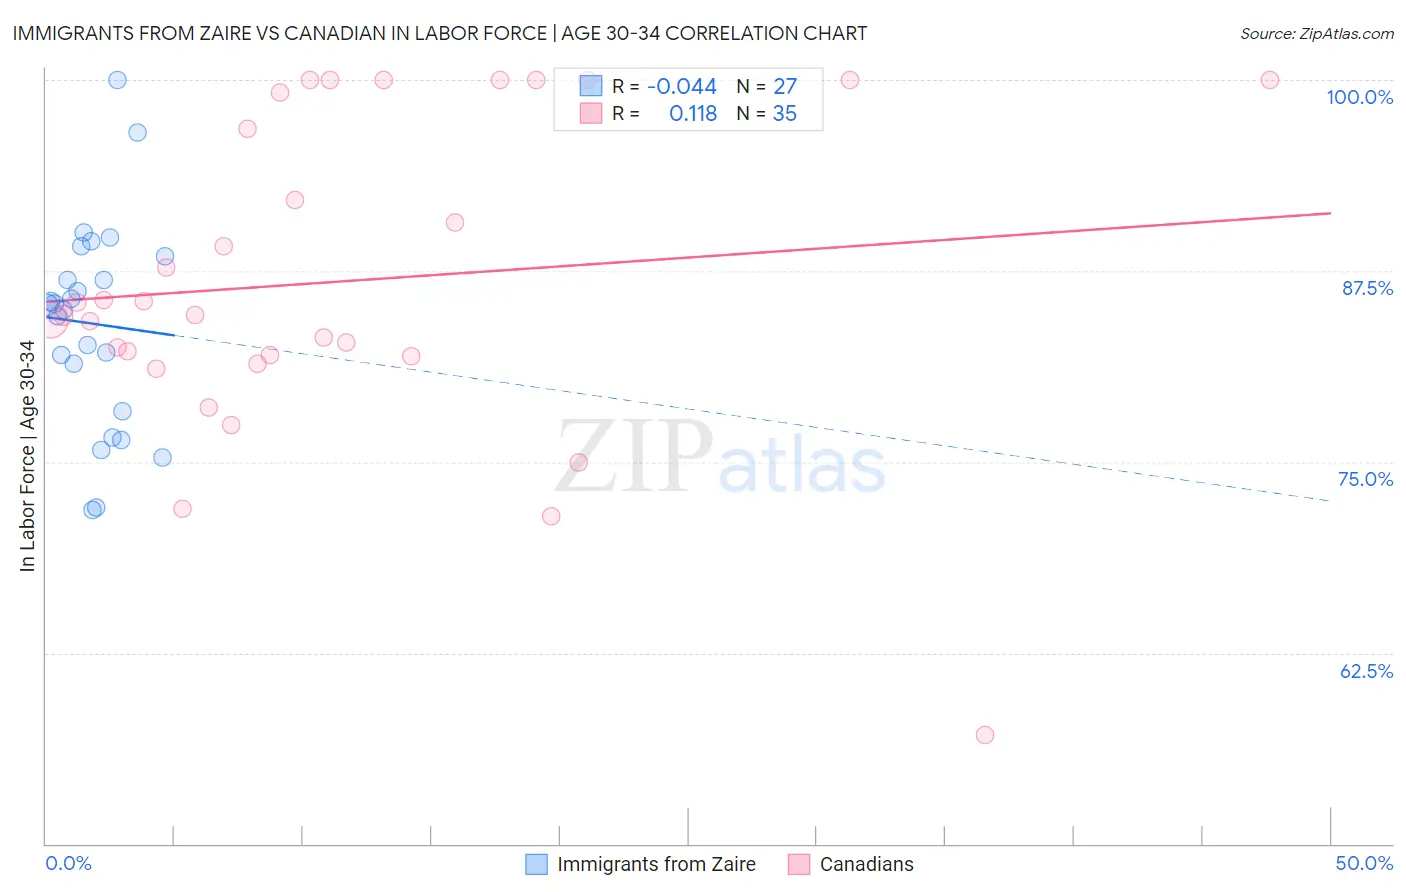 Immigrants from Zaire vs Canadian In Labor Force | Age 30-34